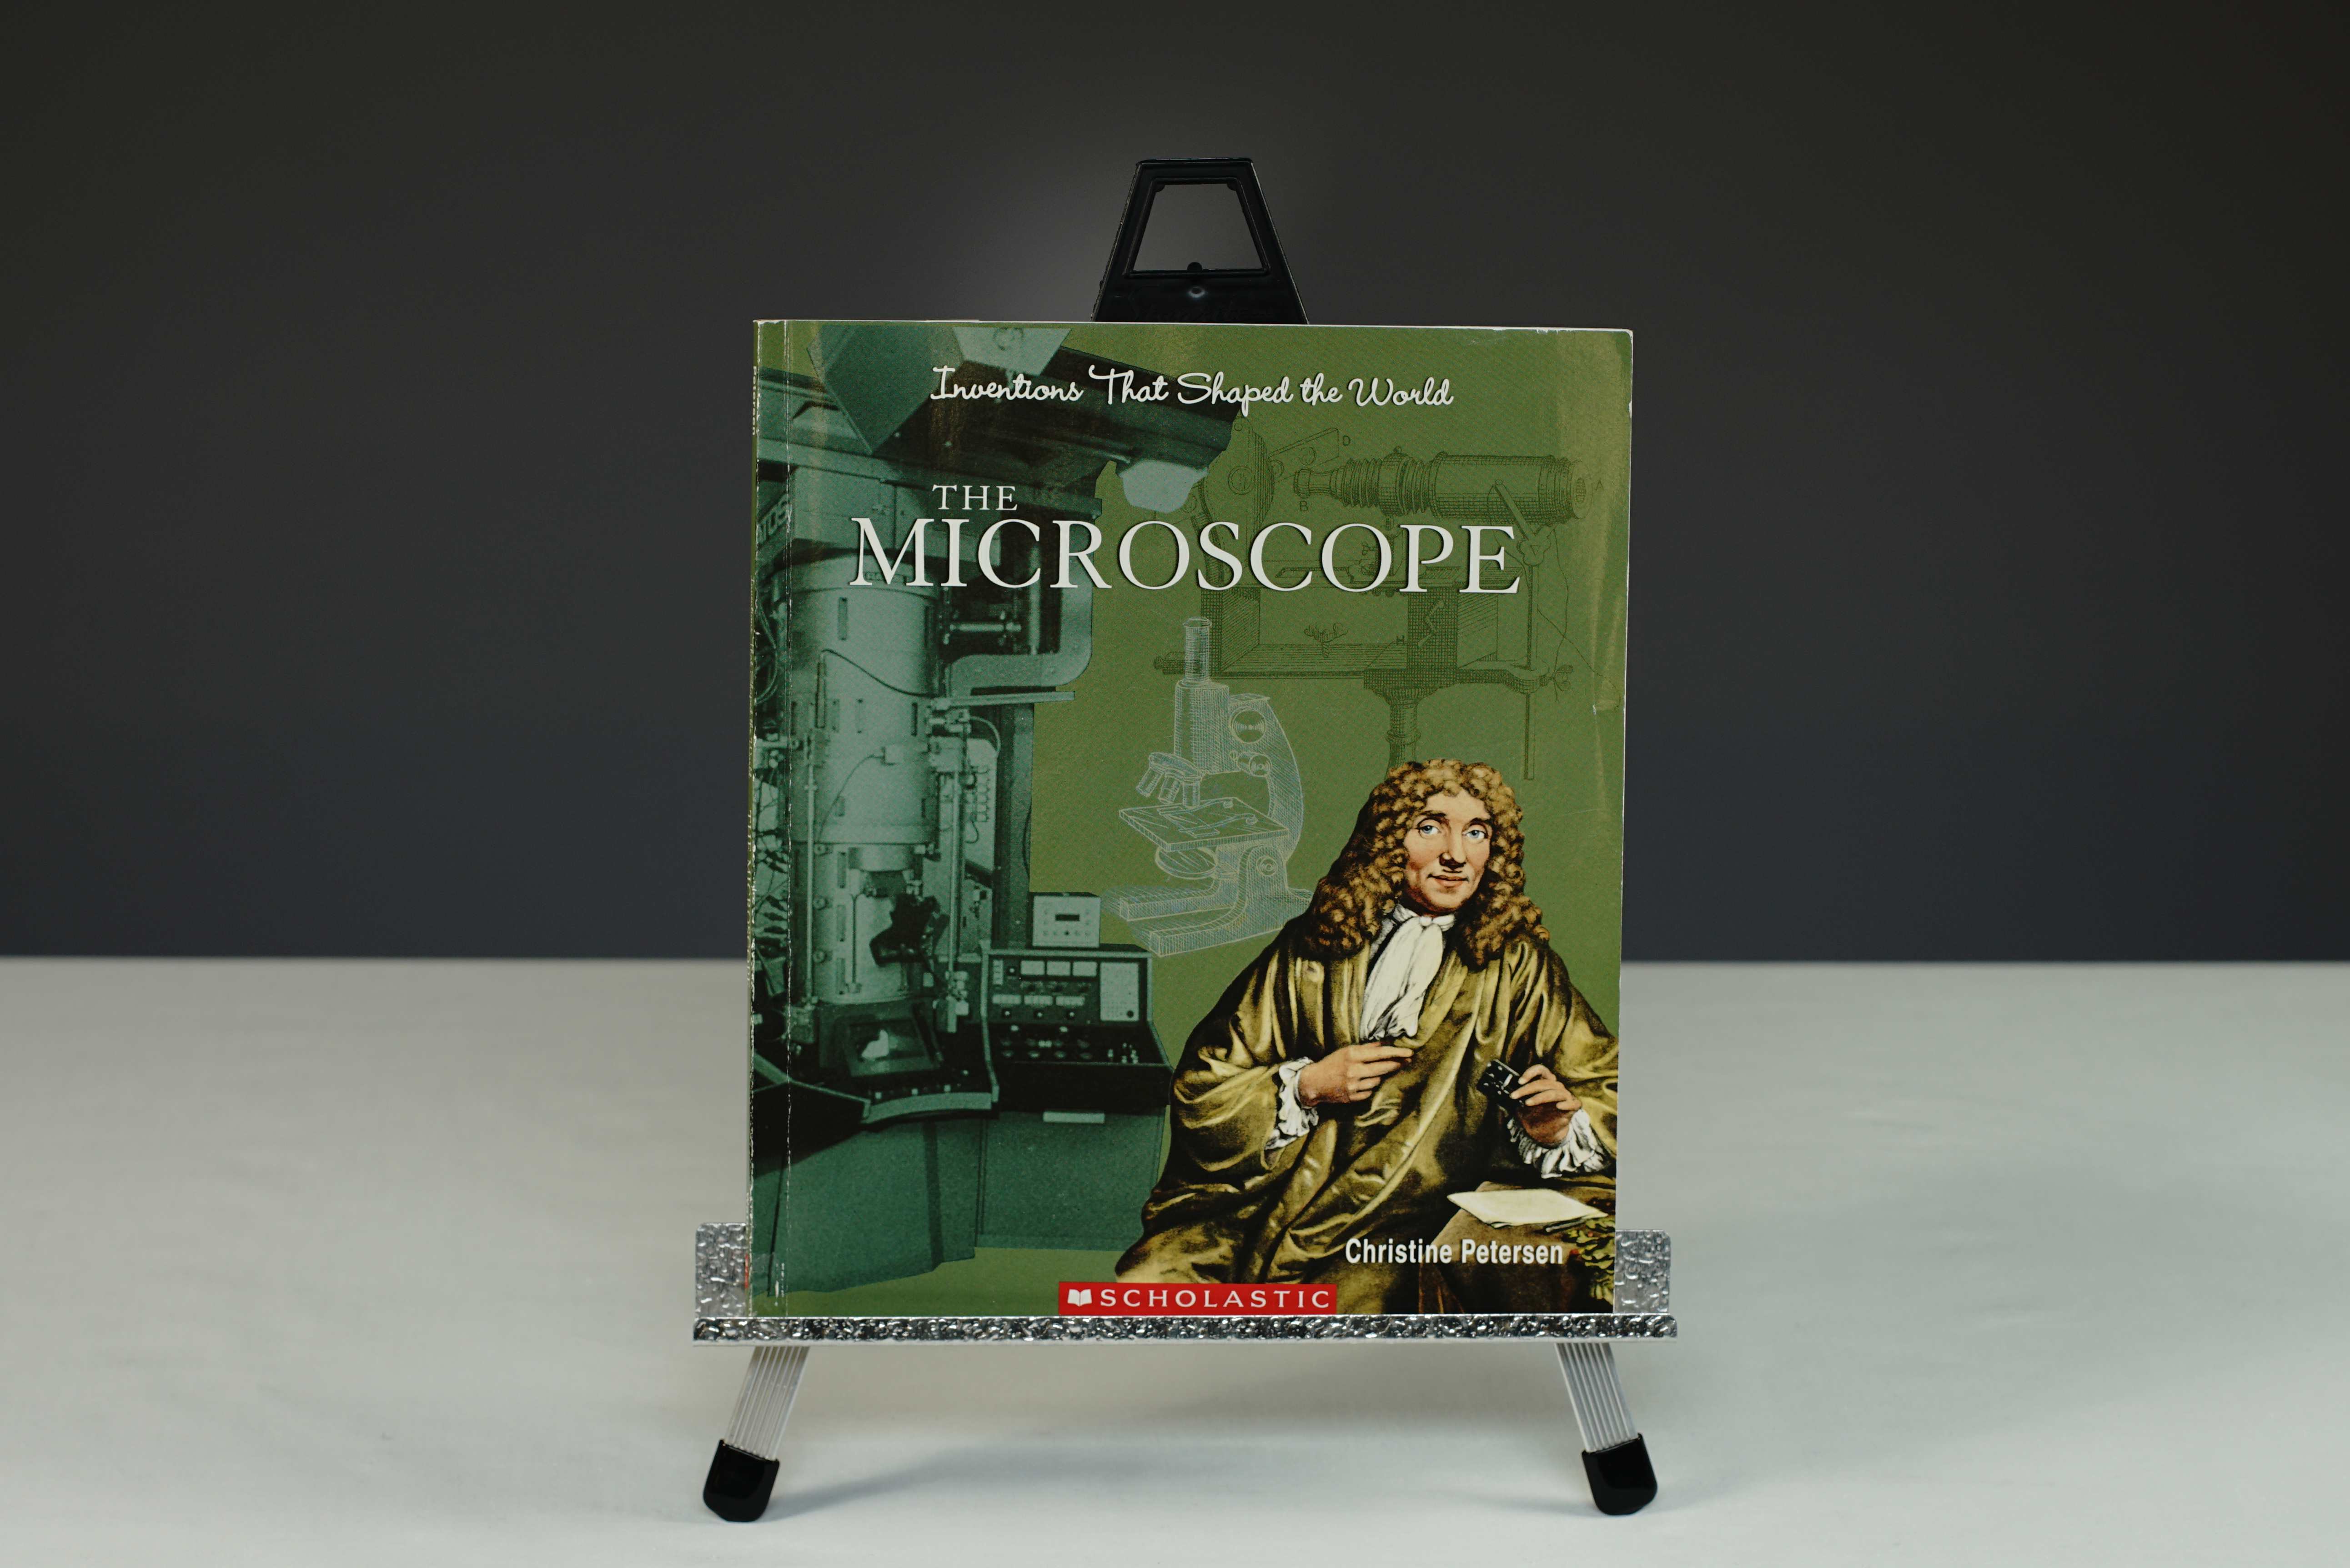 Inventions That Shaped the World – The Microscope Book